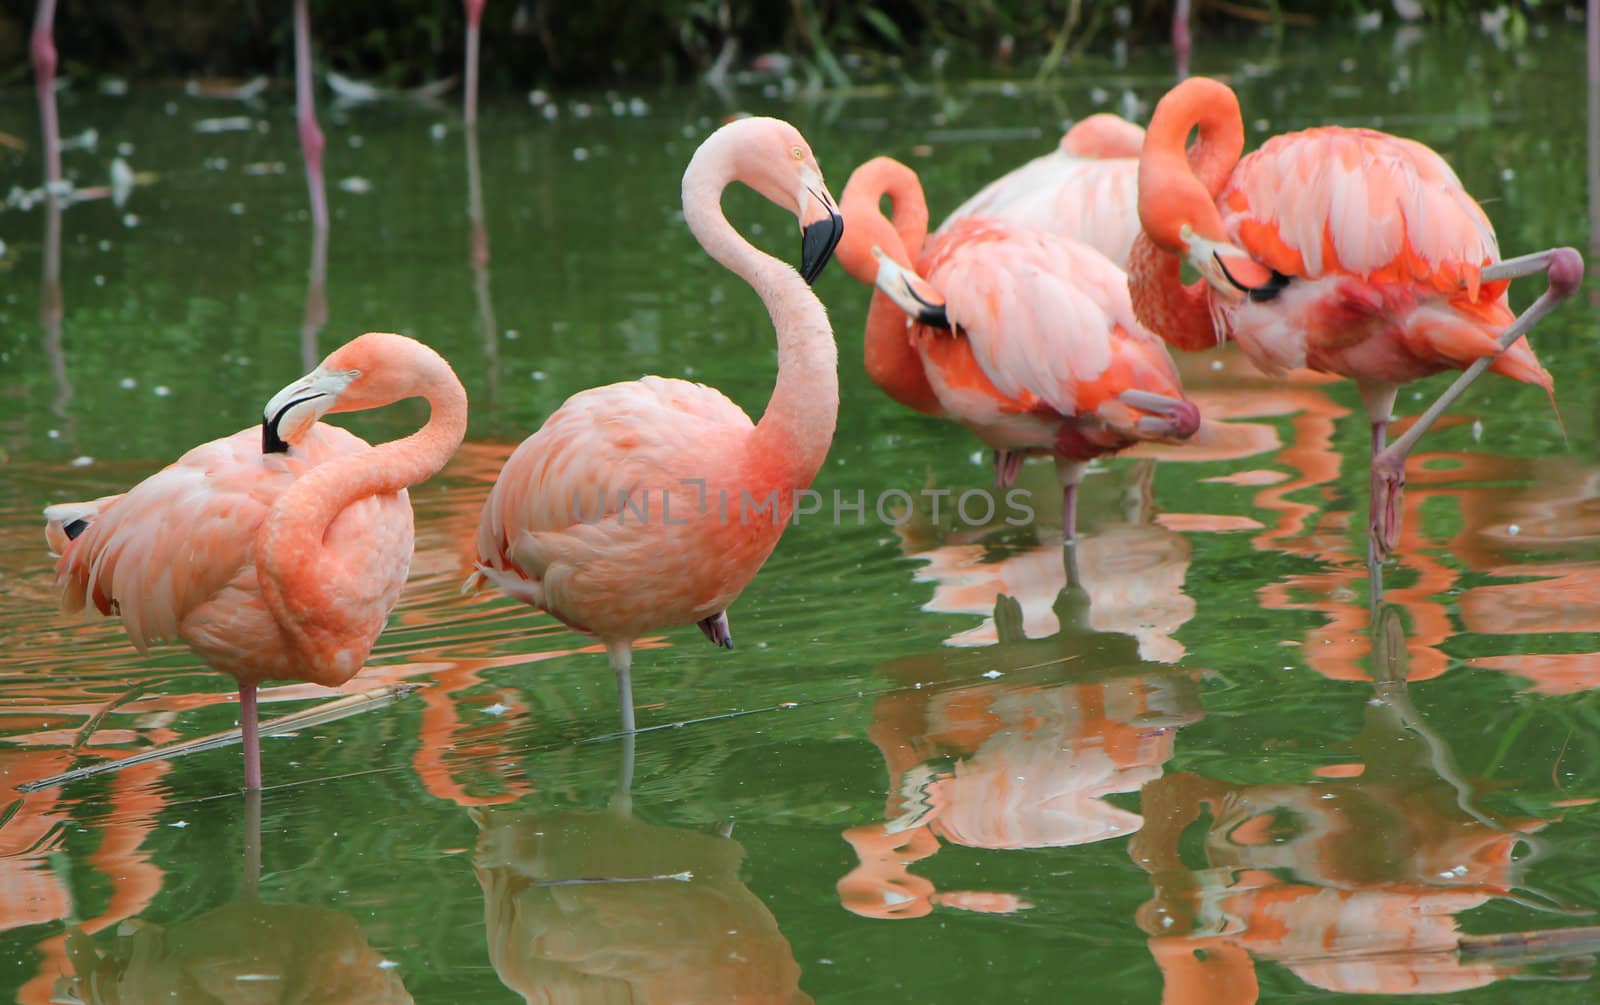 Flamingos cleaning in the water by Elenaphotos21